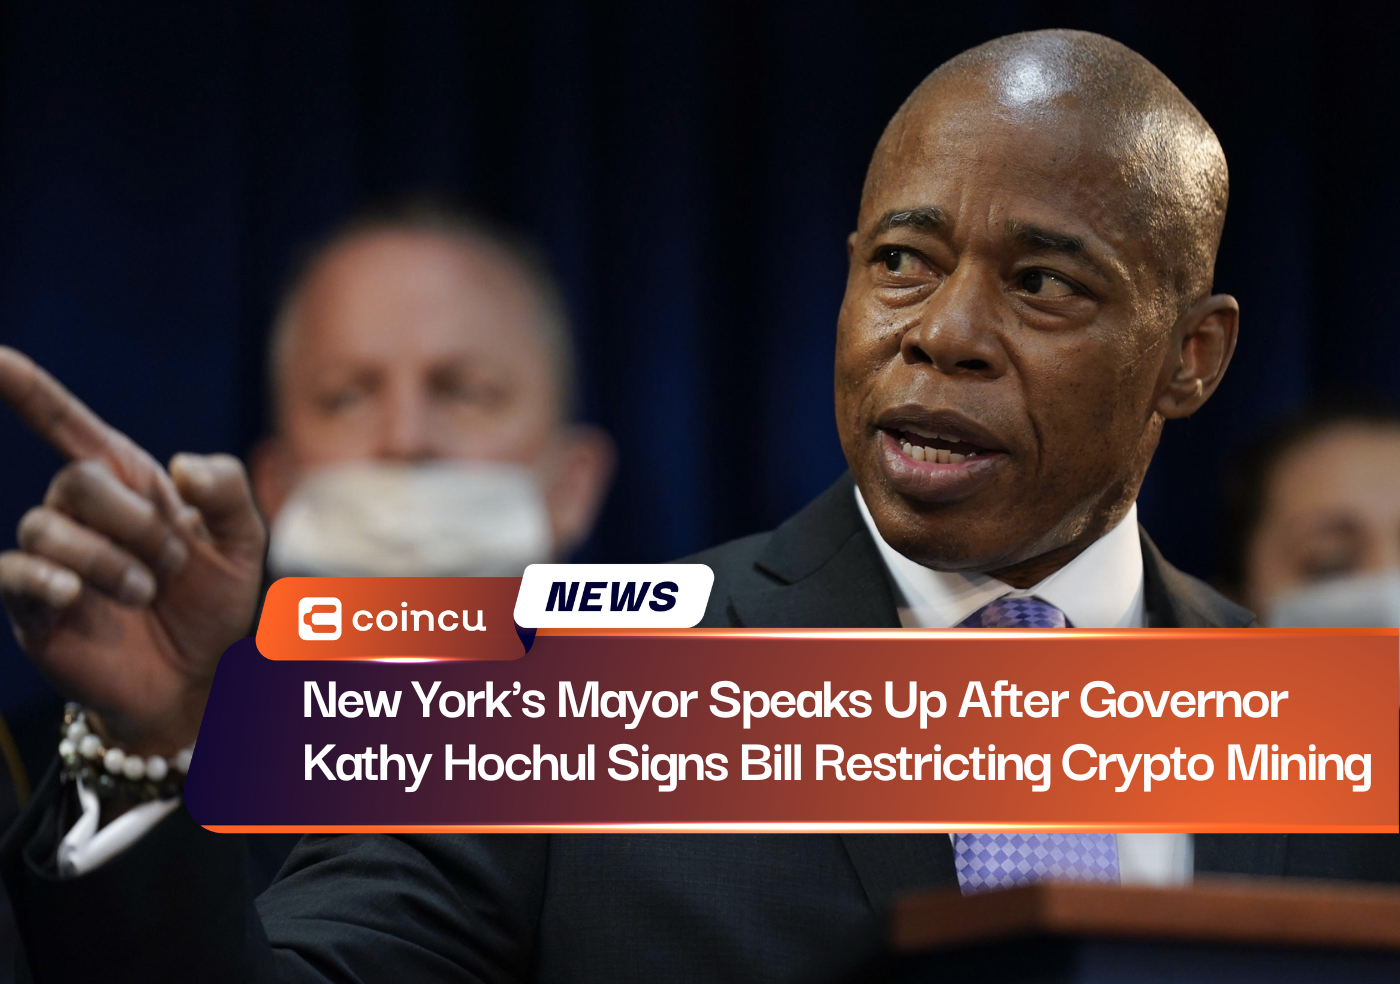 New York's Mayor Speaks Up After Governor Kathy Hochul Signs Bill Restricting Crypto Mining